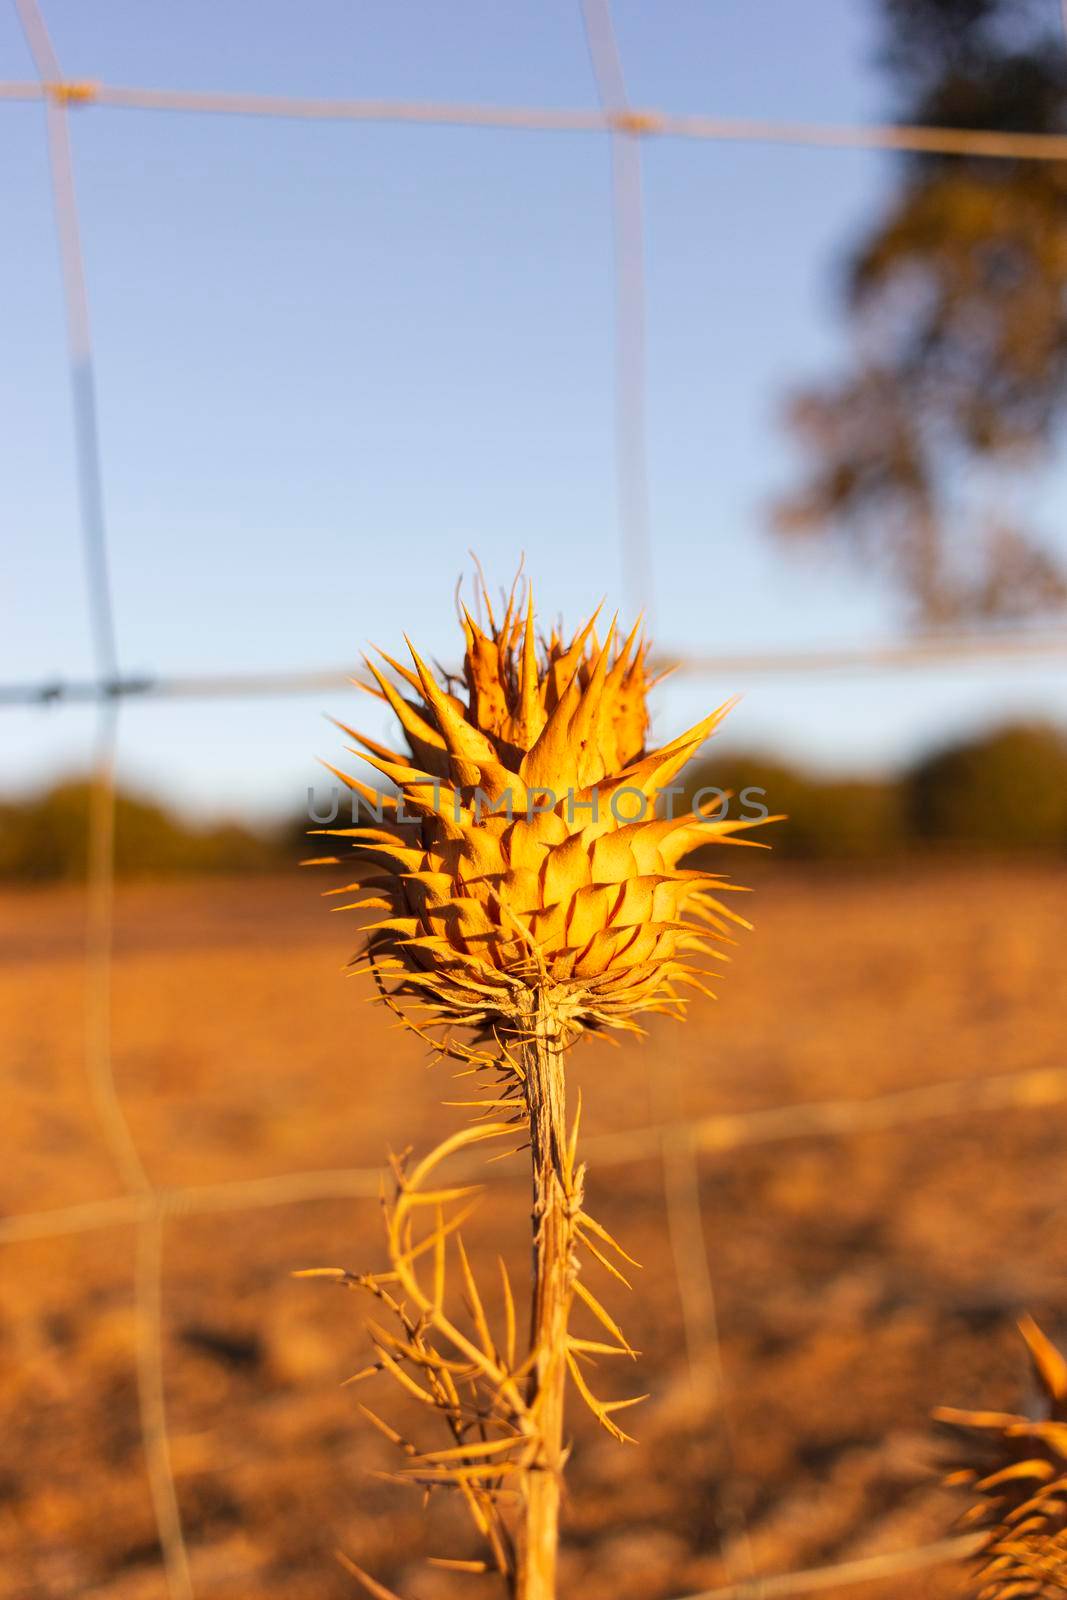 Dried thistles in the field of a village in Andalusia southern Spain